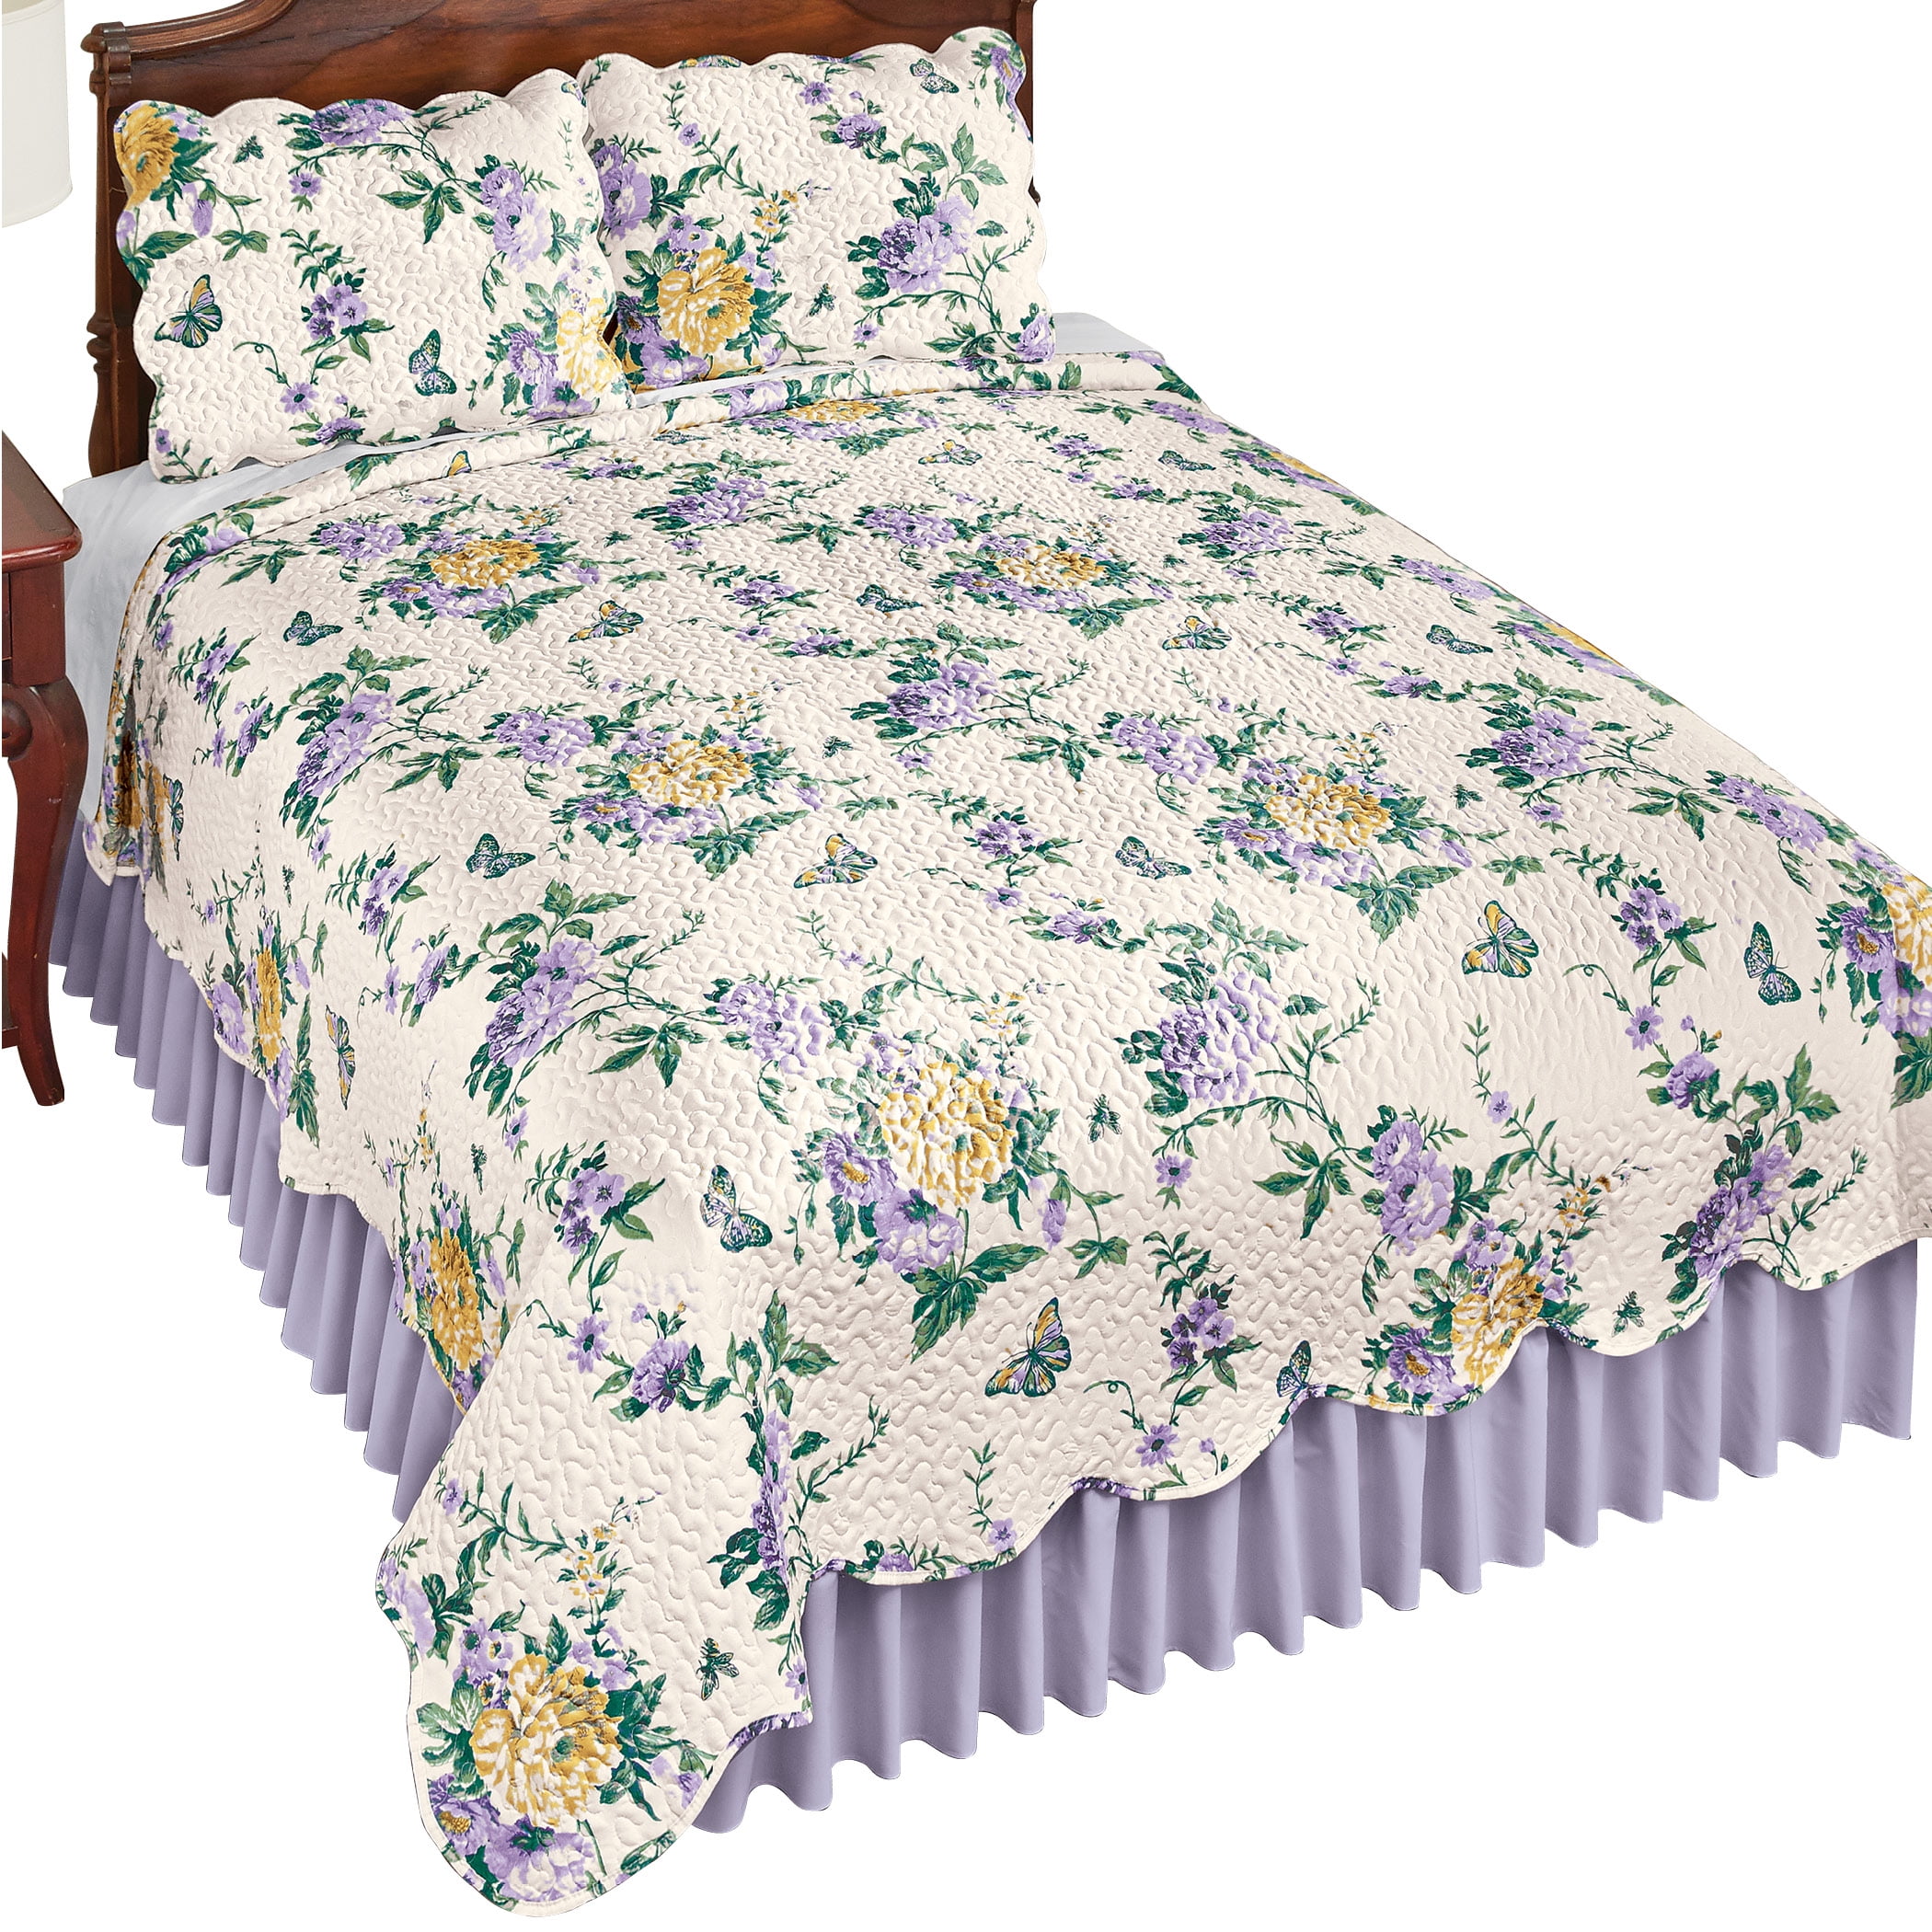 Details about   Butterfly Quilted Bedspread & Pillow Shams Set Cheerful Spring Cute Print 